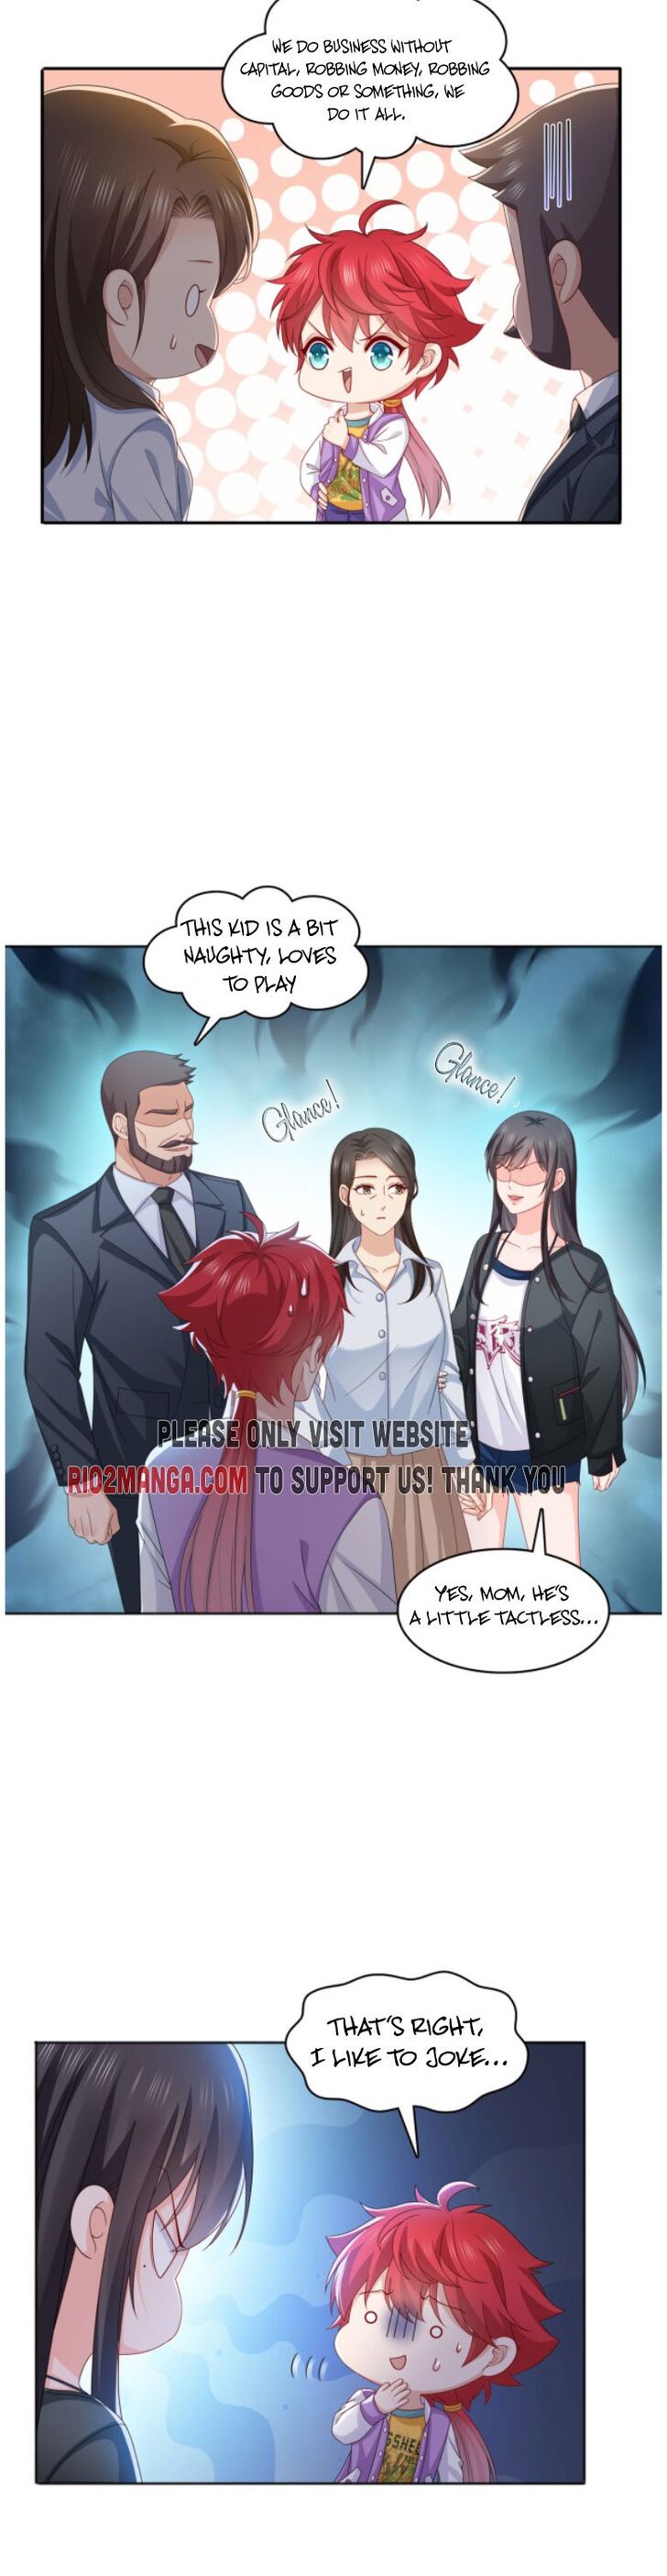 100% Sweet Love: The Delinquent XXX Wife Is a Bit Sweet (Novel) Ch.371